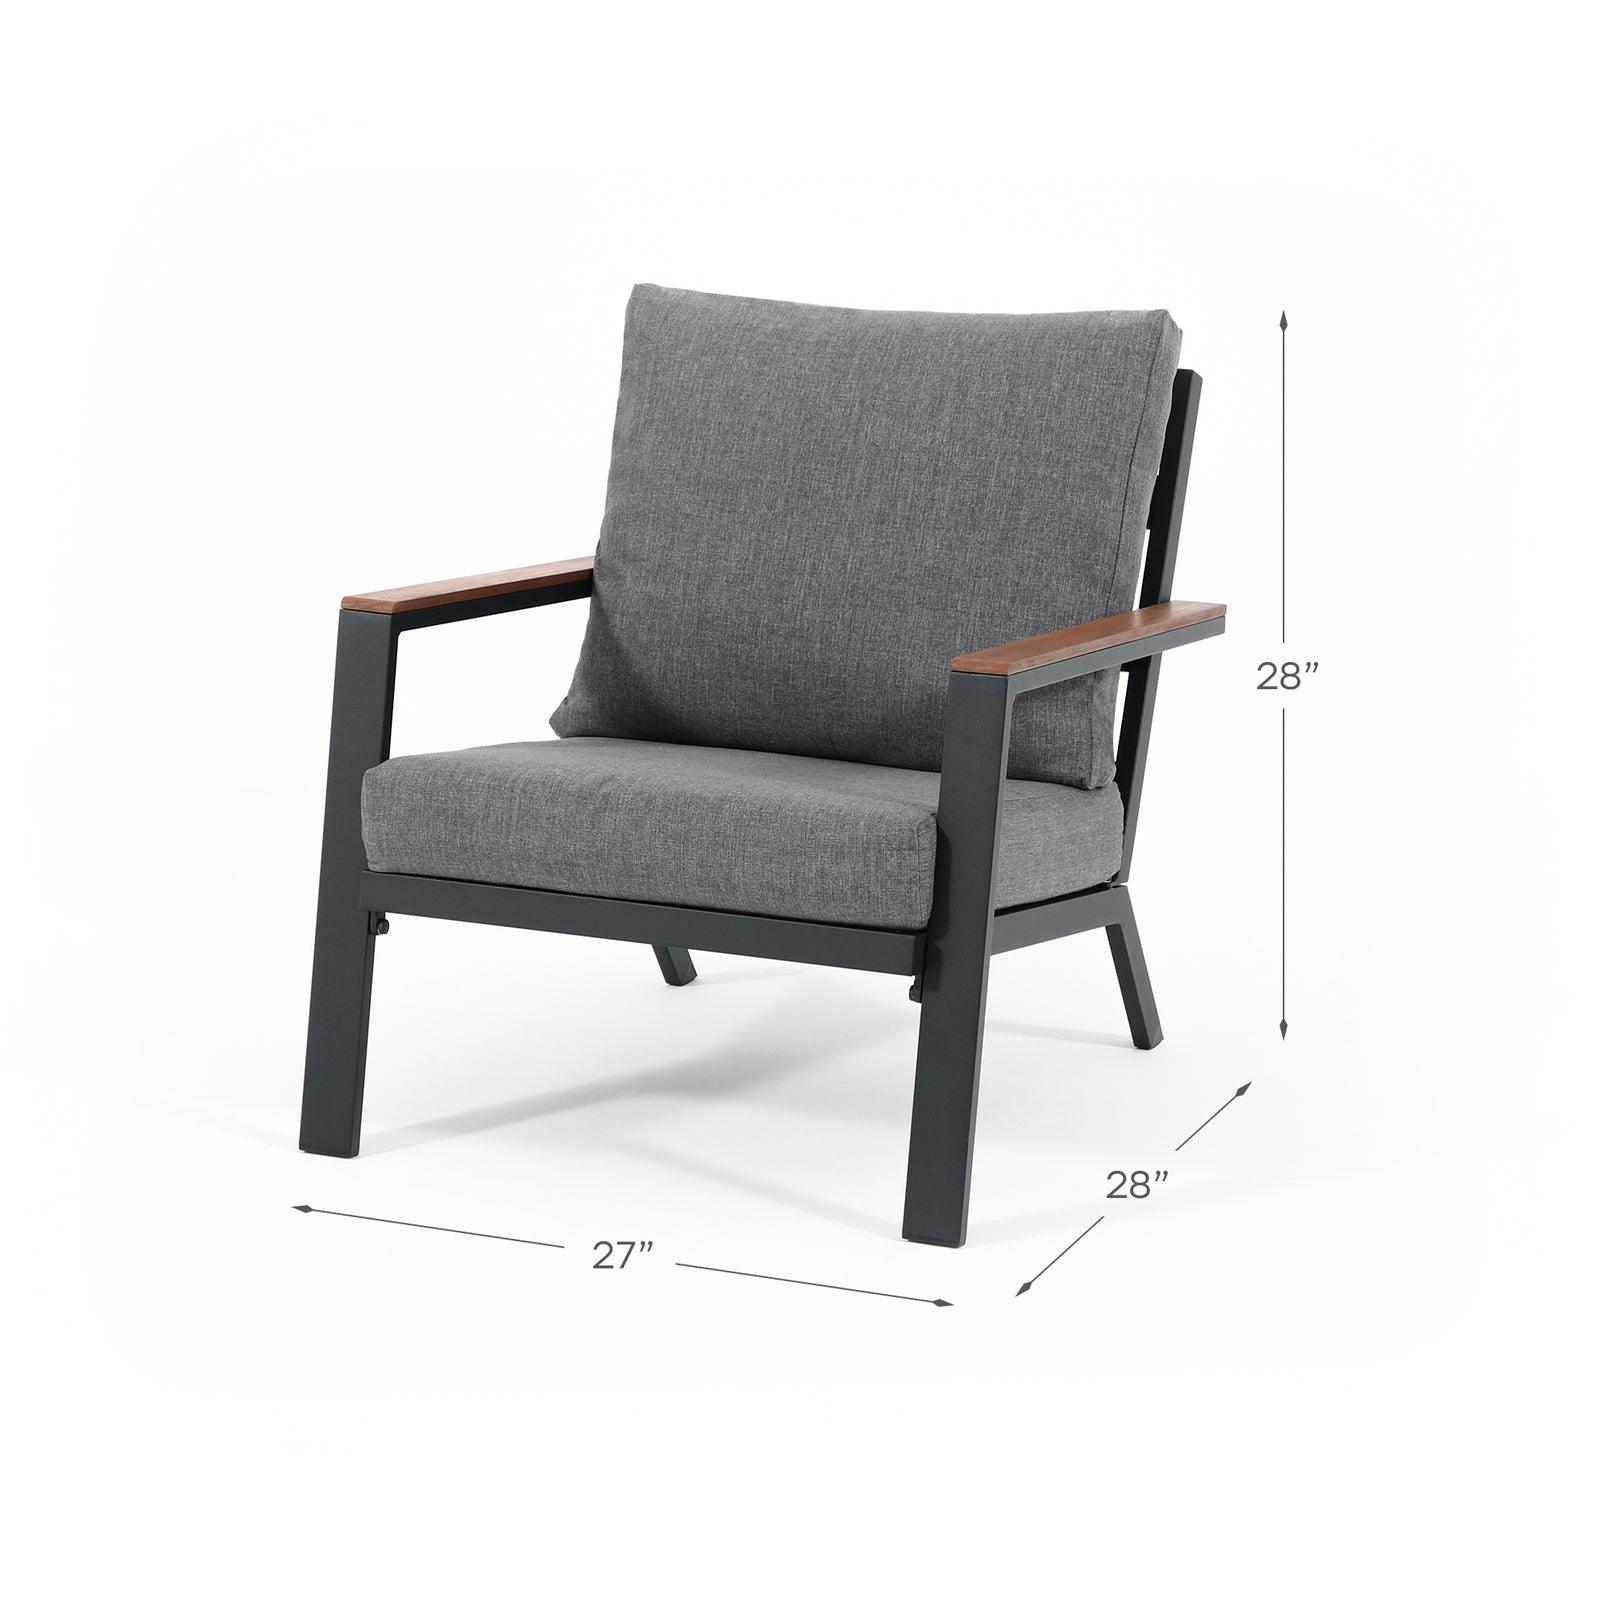 Ronda outdoor lounge chair  with wood design, Dimension information- Jardina Furniture